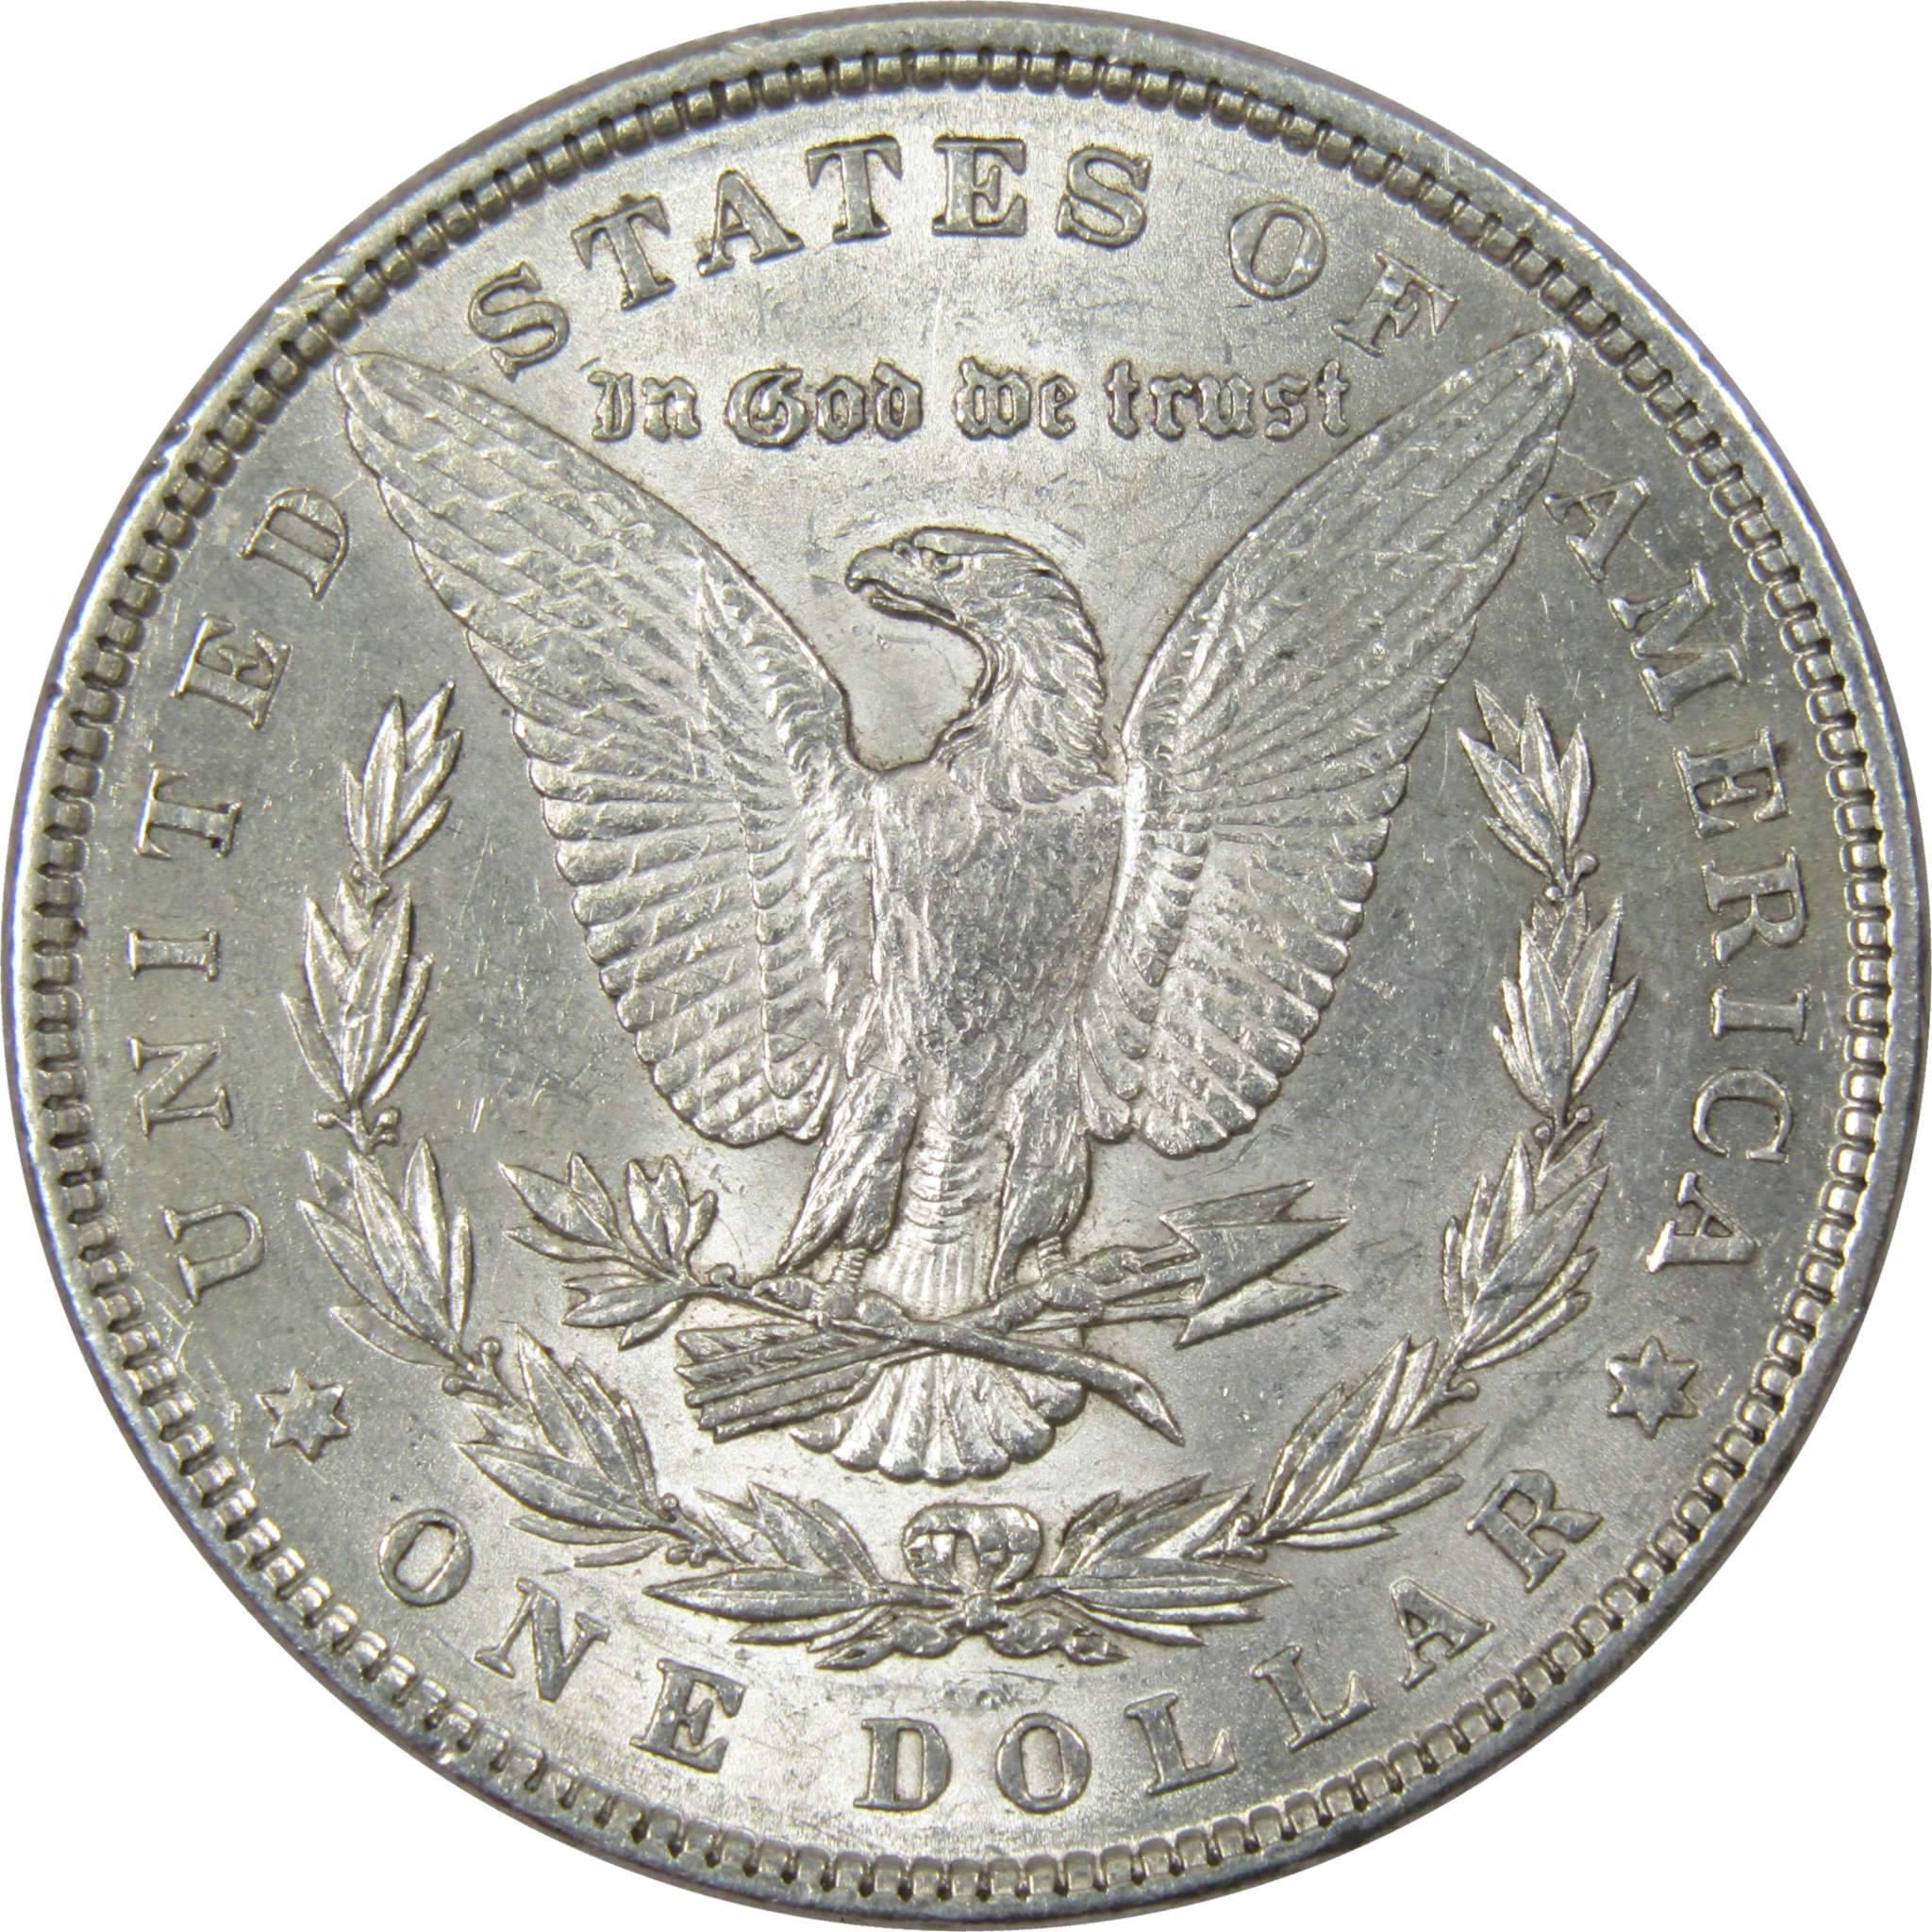 1884 Morgan Dollar AU About Uncirculated 90% Silver $1 US Coin Collectible - Morgan coin - Morgan silver dollar - Morgan silver dollar for sale - Profile Coins &amp; Collectibles